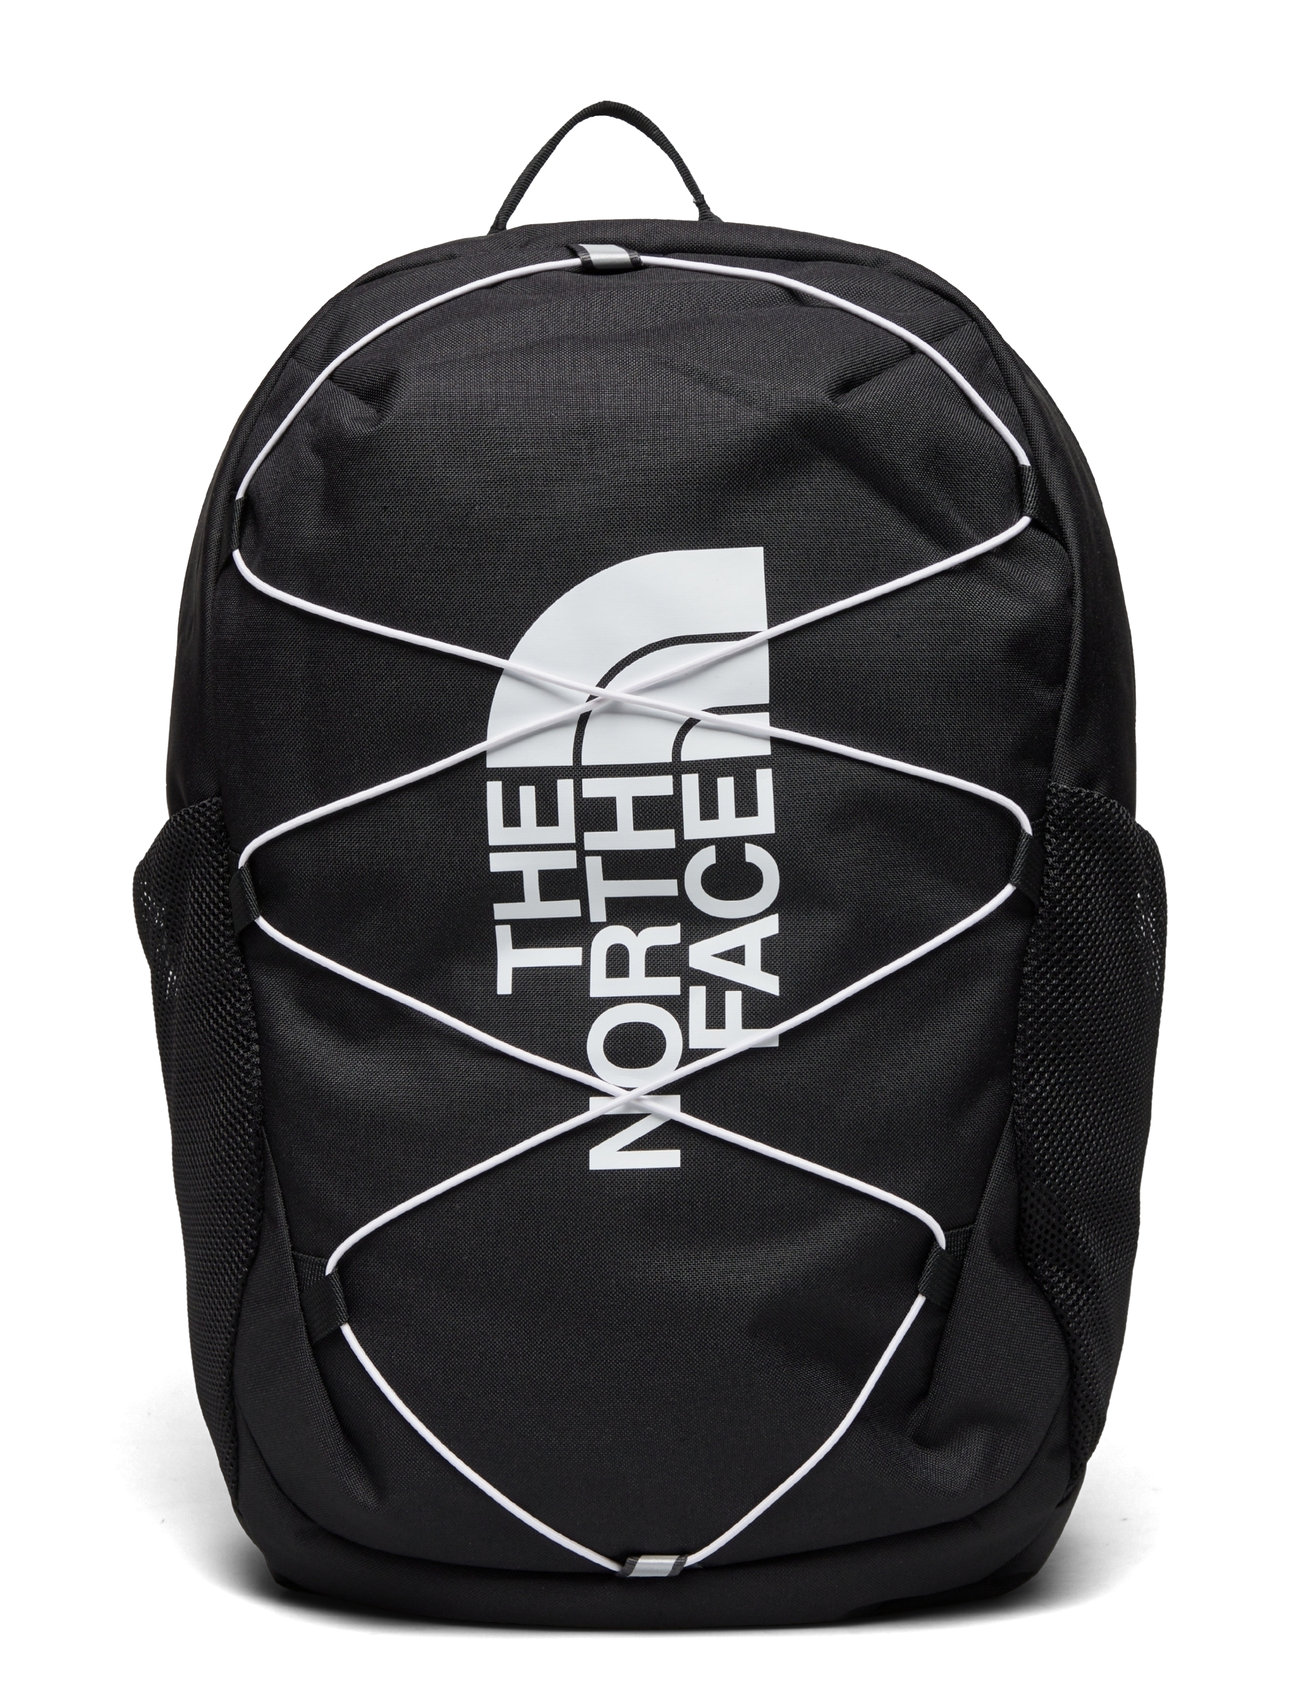 Y Court Jester Sport Bags Backpacks Black The North Face